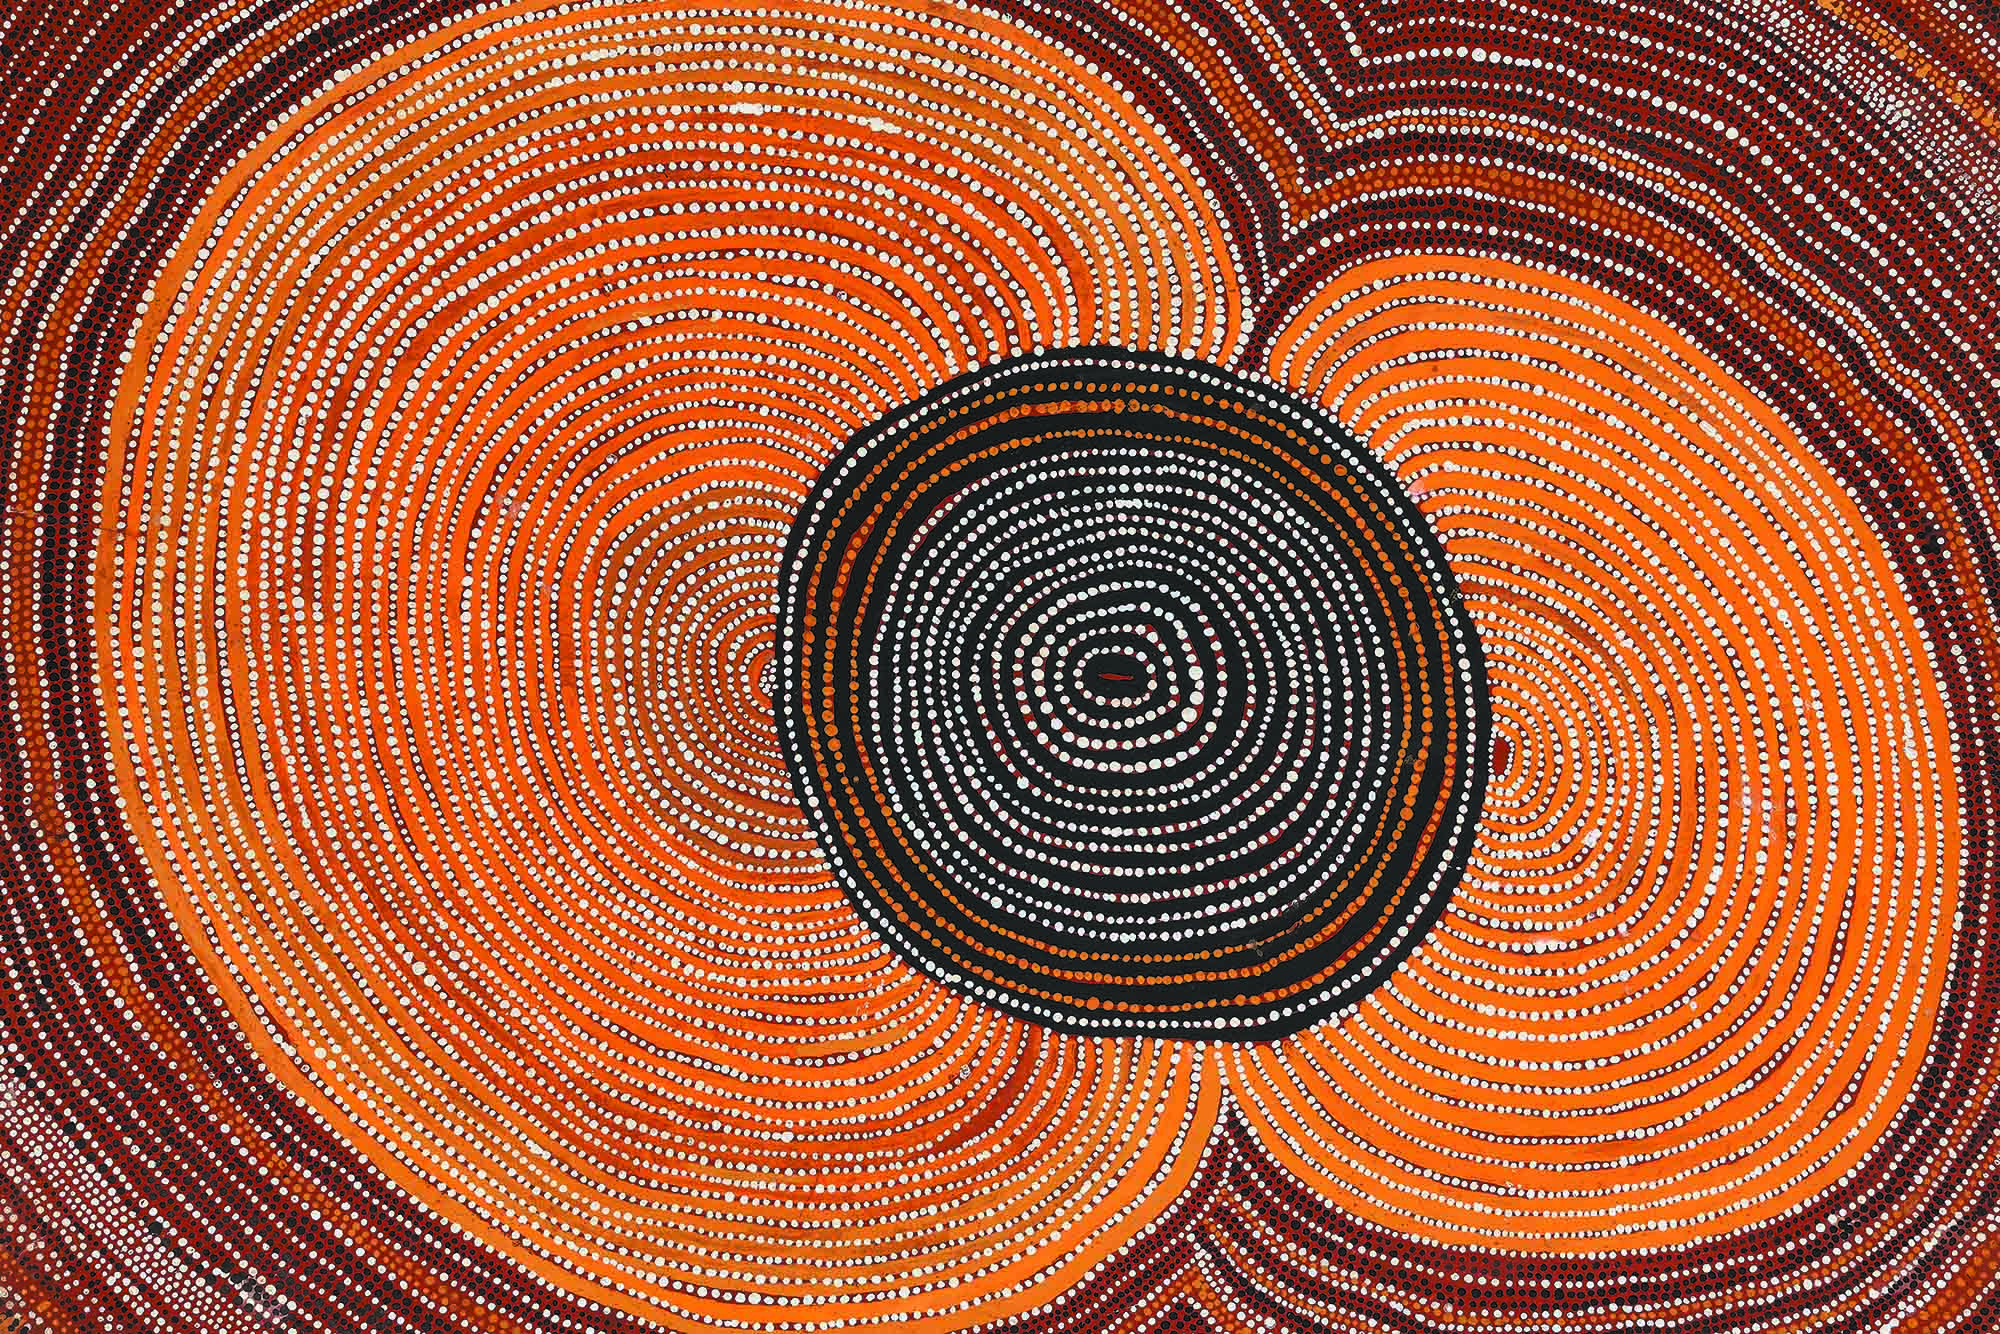 Shorty Lungkarta Tjungurrayi’s painting: oranges, reds, browns, and yellow dots in circle formation